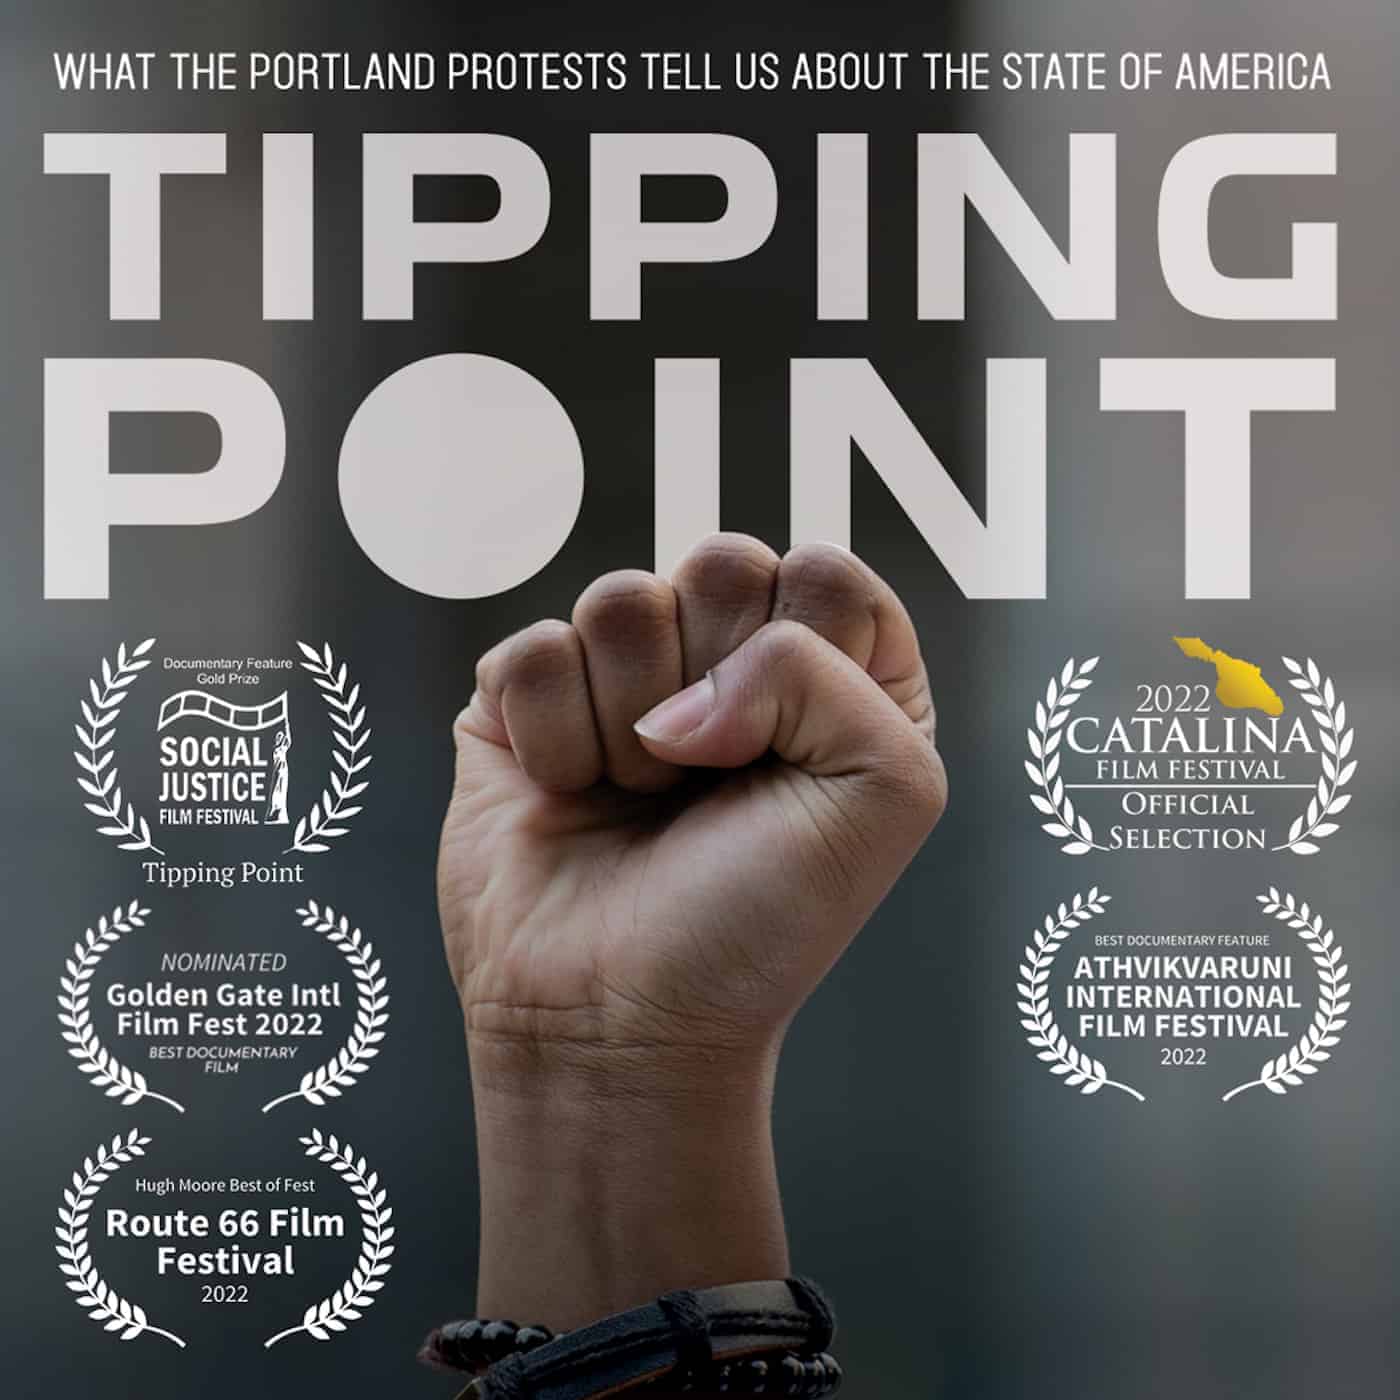 Tipping Point - a documentary about the Portland Oregon protests